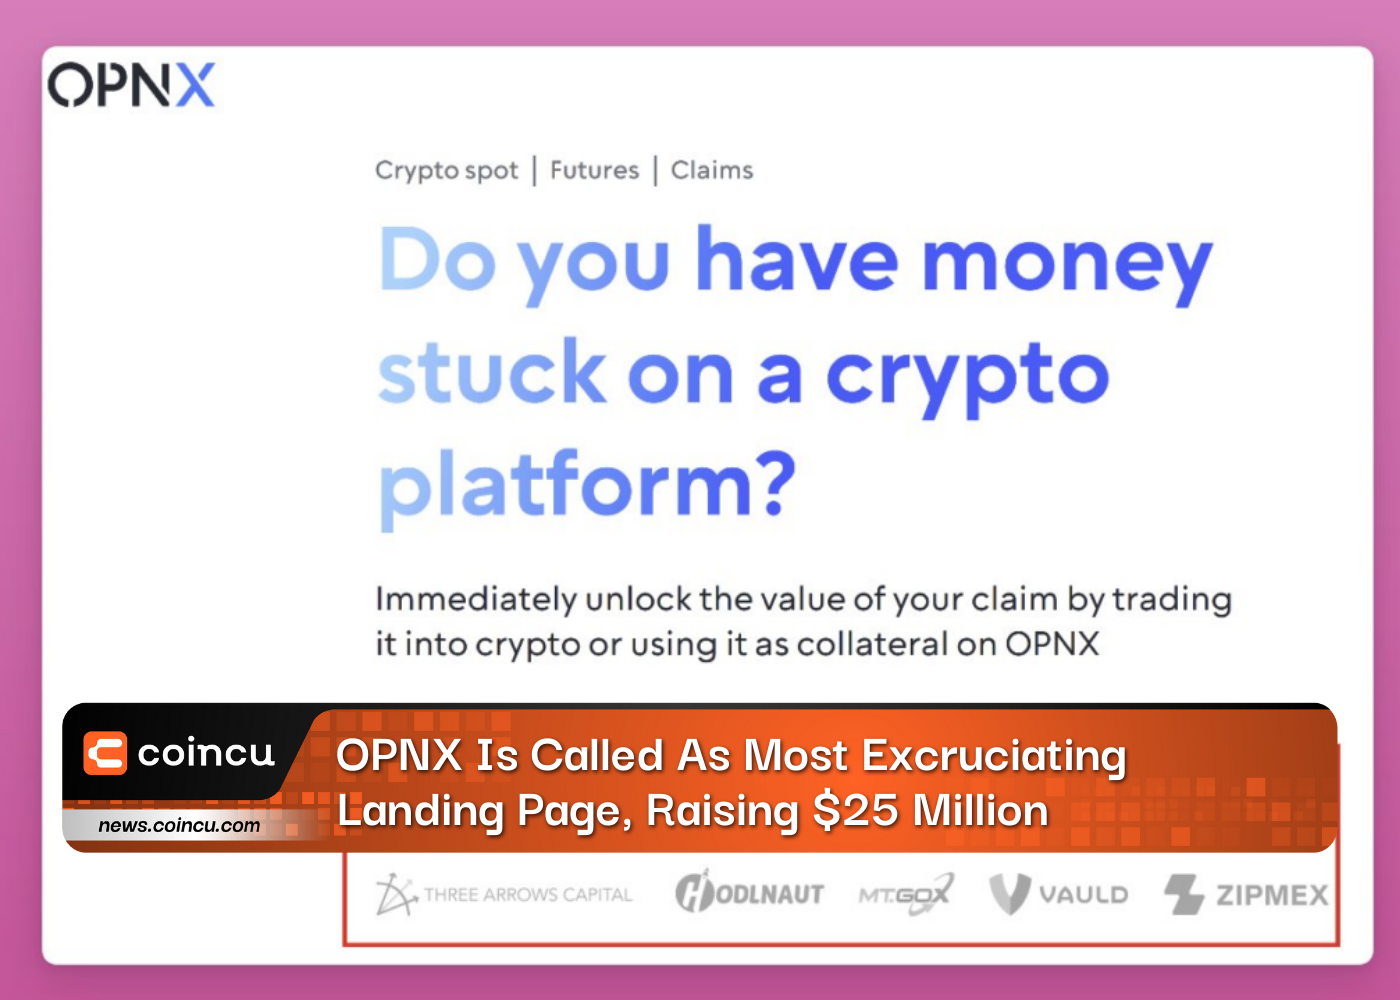 OPNX Is Called As Most Excruciating Landing Page, Raising $25 Million